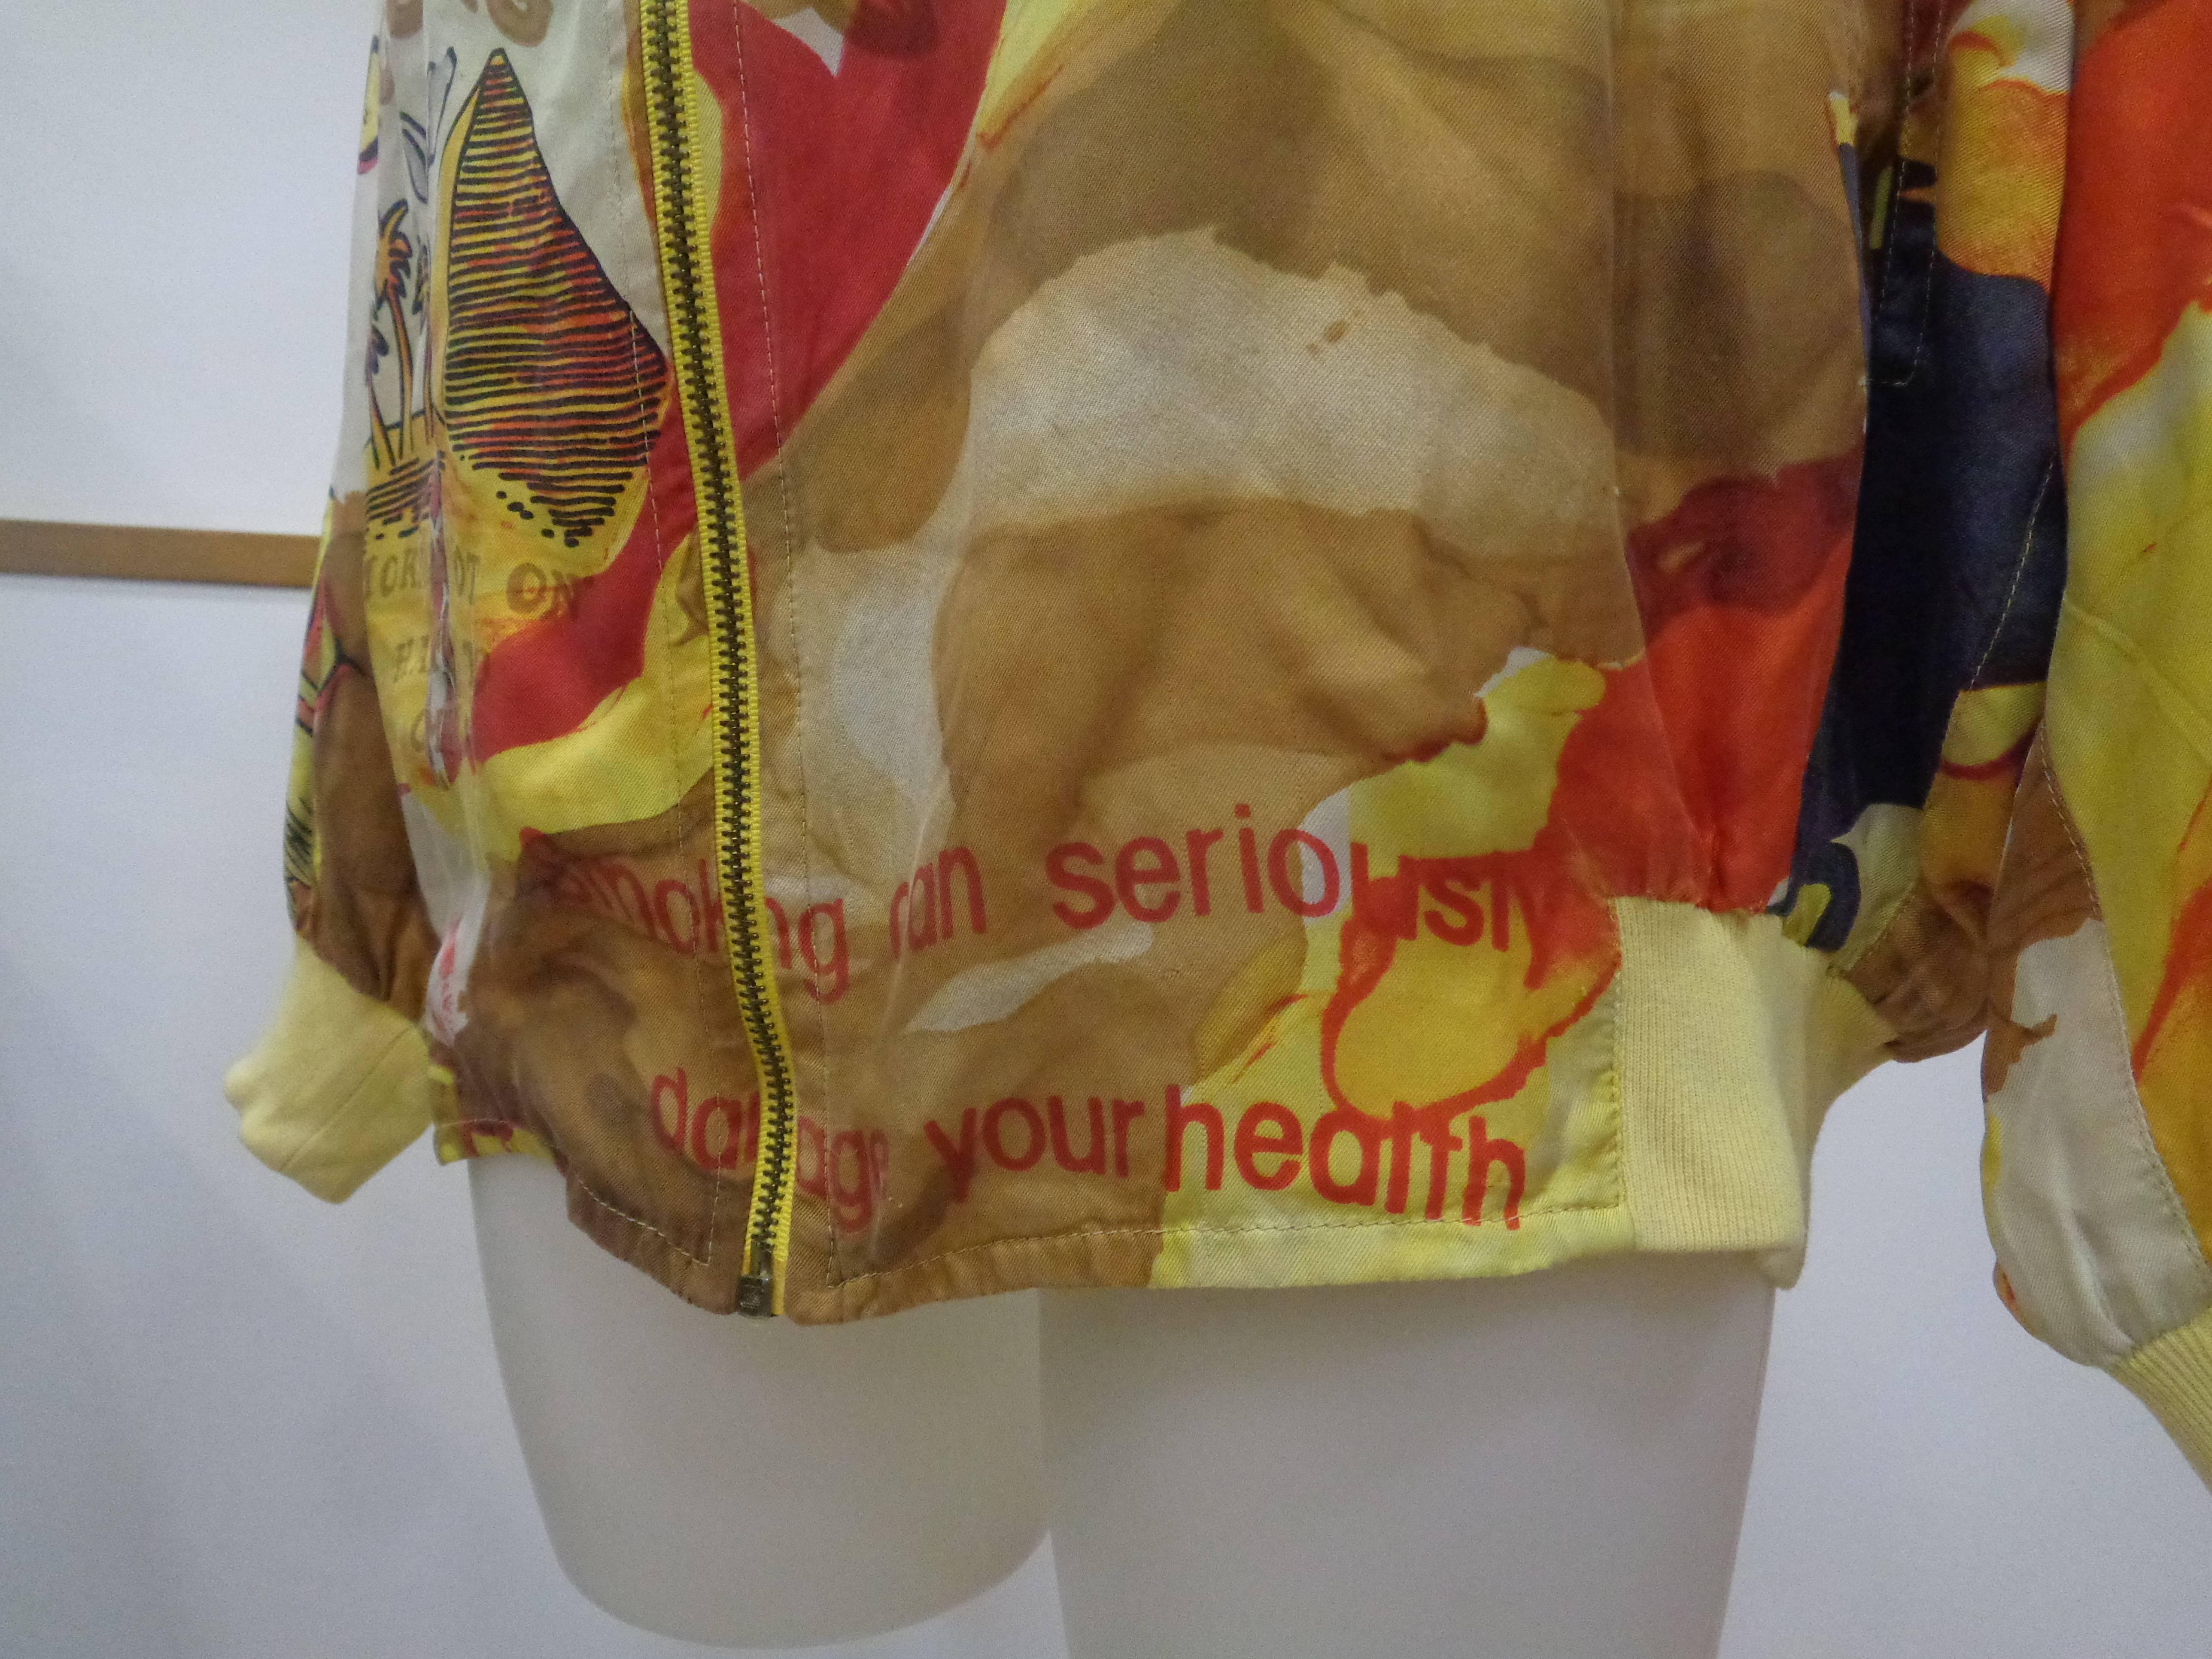 Iceberg multicolour Silk Bomber Jacket

Totally made in italy in 1992

Composition: Silk

Size 42